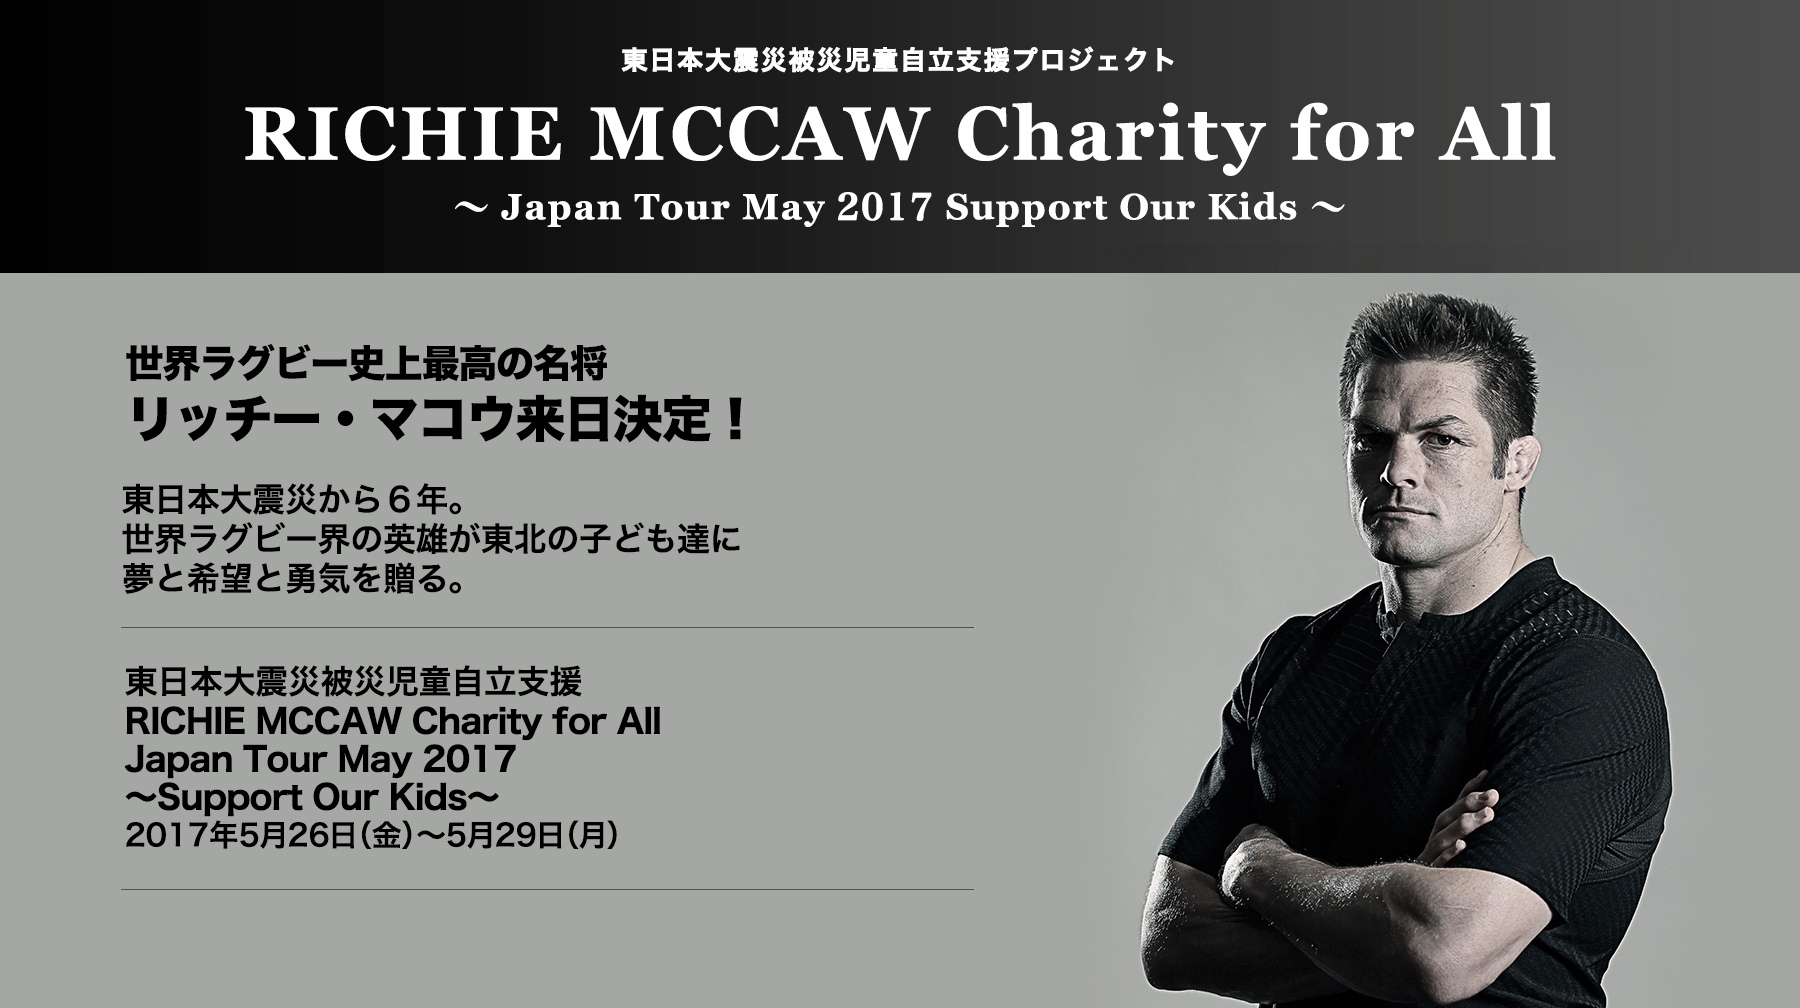 RICHIE MCCAW Charity for All 〜Japan Tour May 2017 Support Our Kids〜世界ラグビー史上最高の名将リッチー・マコウ来日決定！東日本大震災から６年。世界ラグビー界の英雄が東北の子ども達に夢と希望と勇気を贈る。